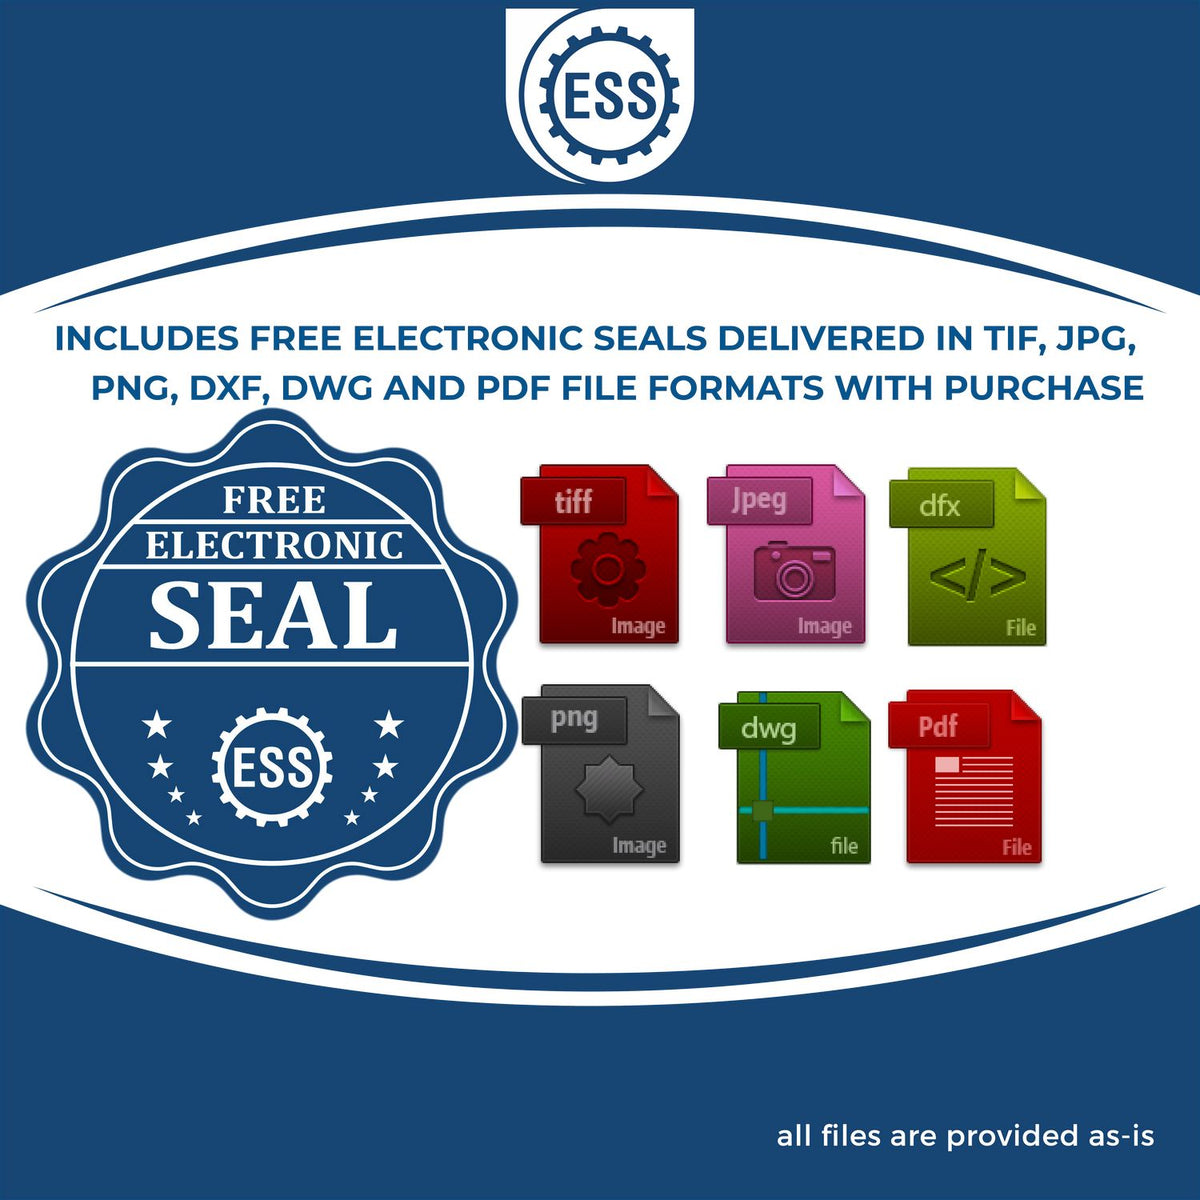 An infographic for the free electronic seal for the Hybrid Pennsylvania Engineer Seal illustrating the different file type icons such as DXF, DWG, TIF, JPG and PNG.